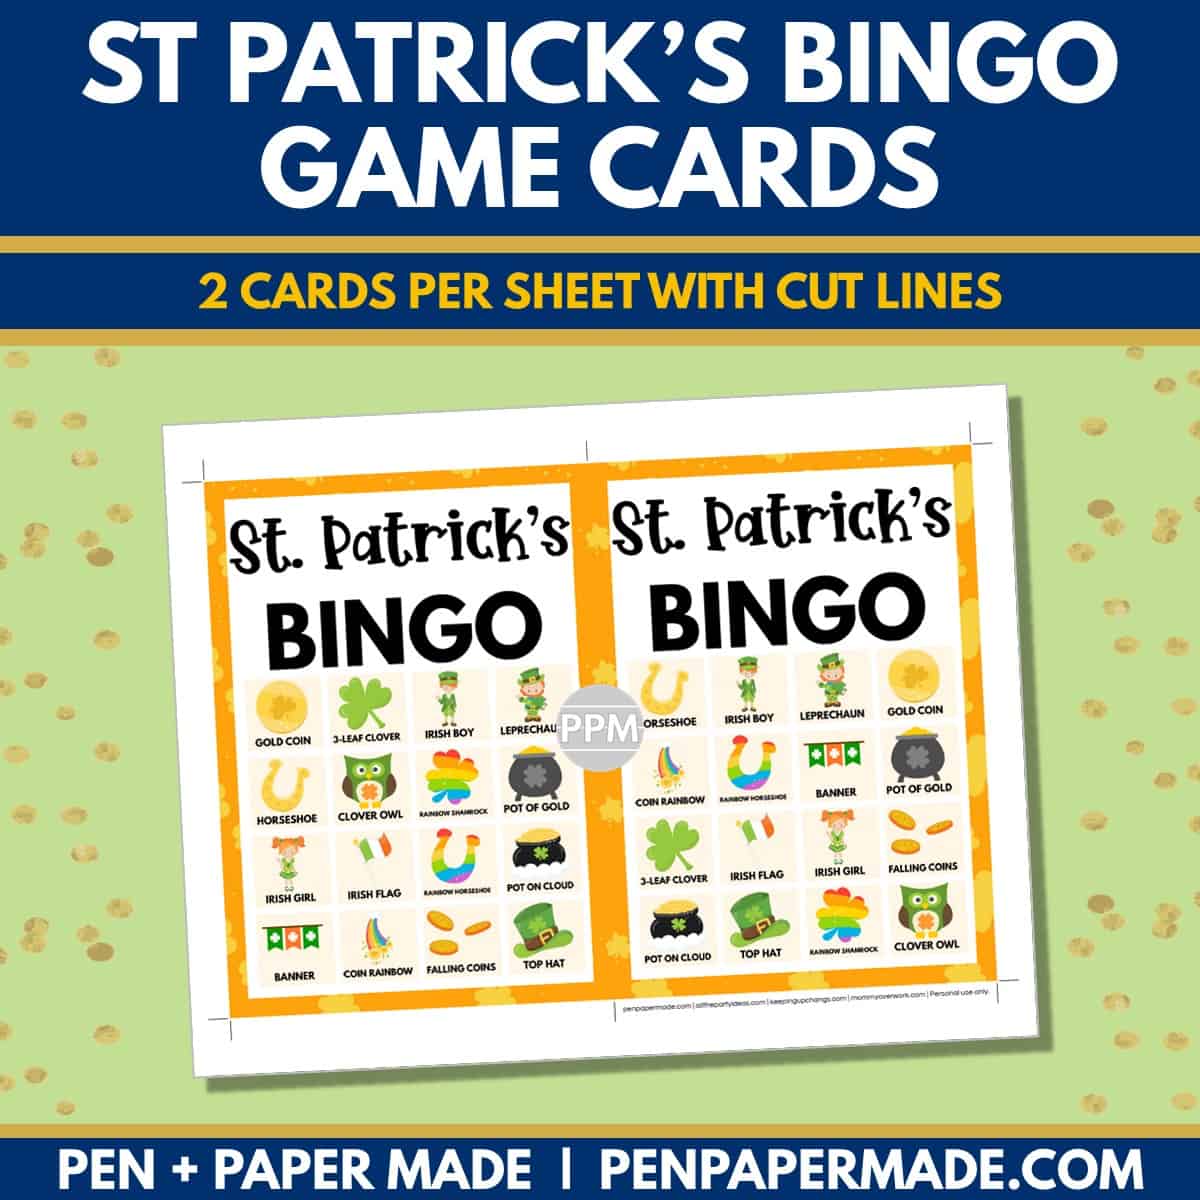 st. patrick's day bingo card 4x4 5x7 game boards with images and text words.